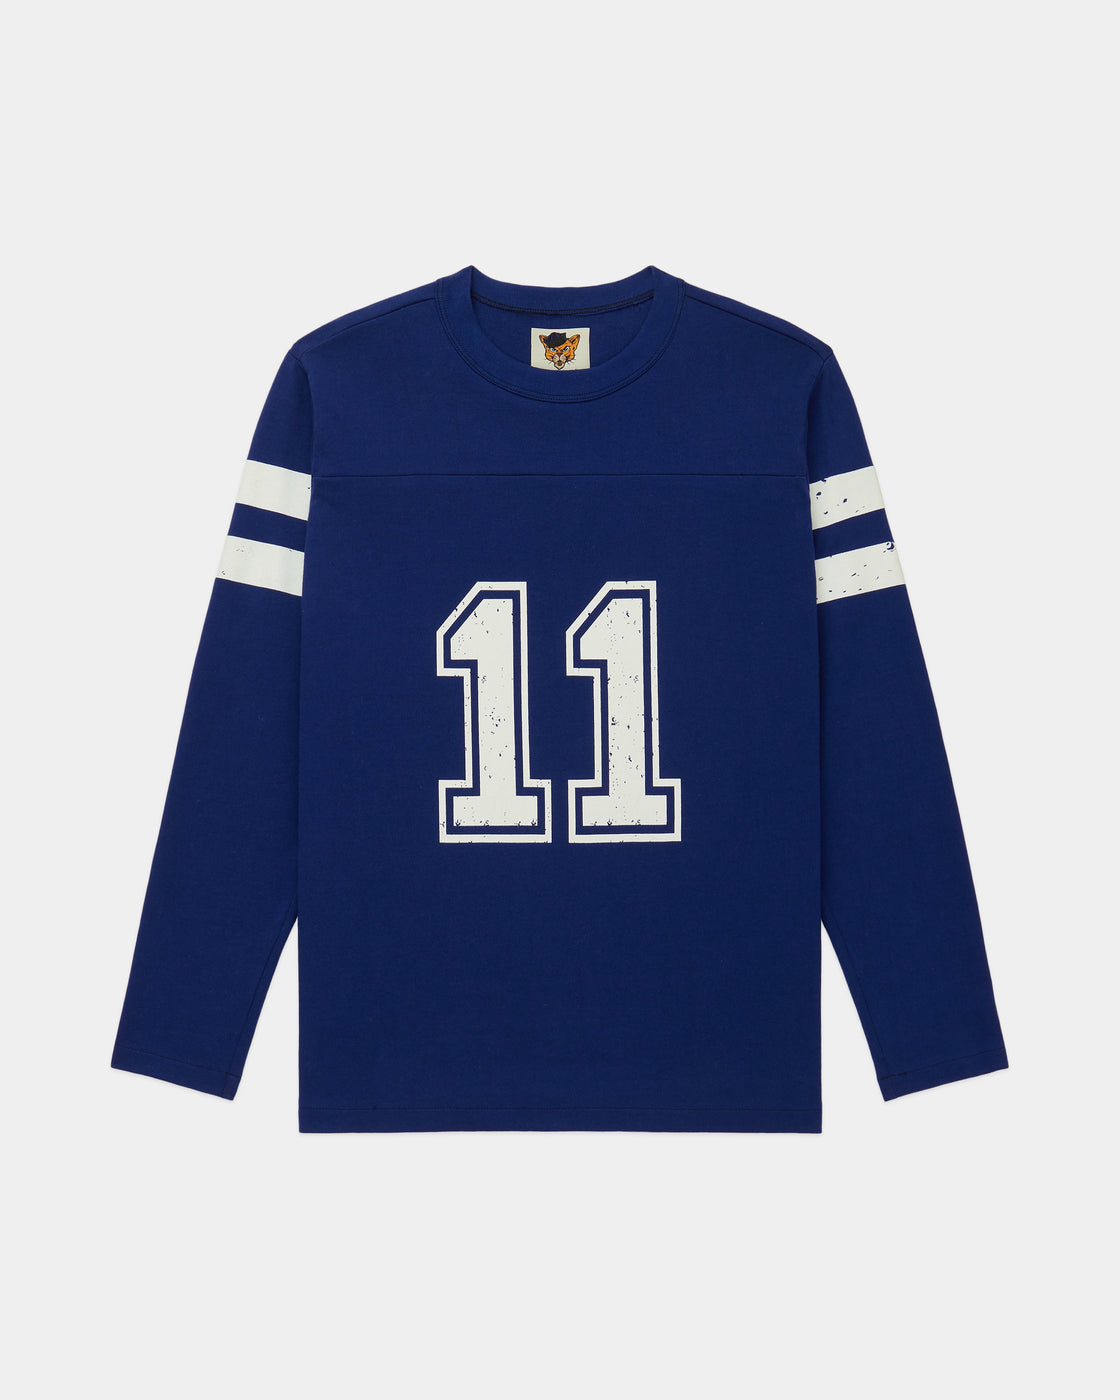 The Practice Jersey, Royal Blue